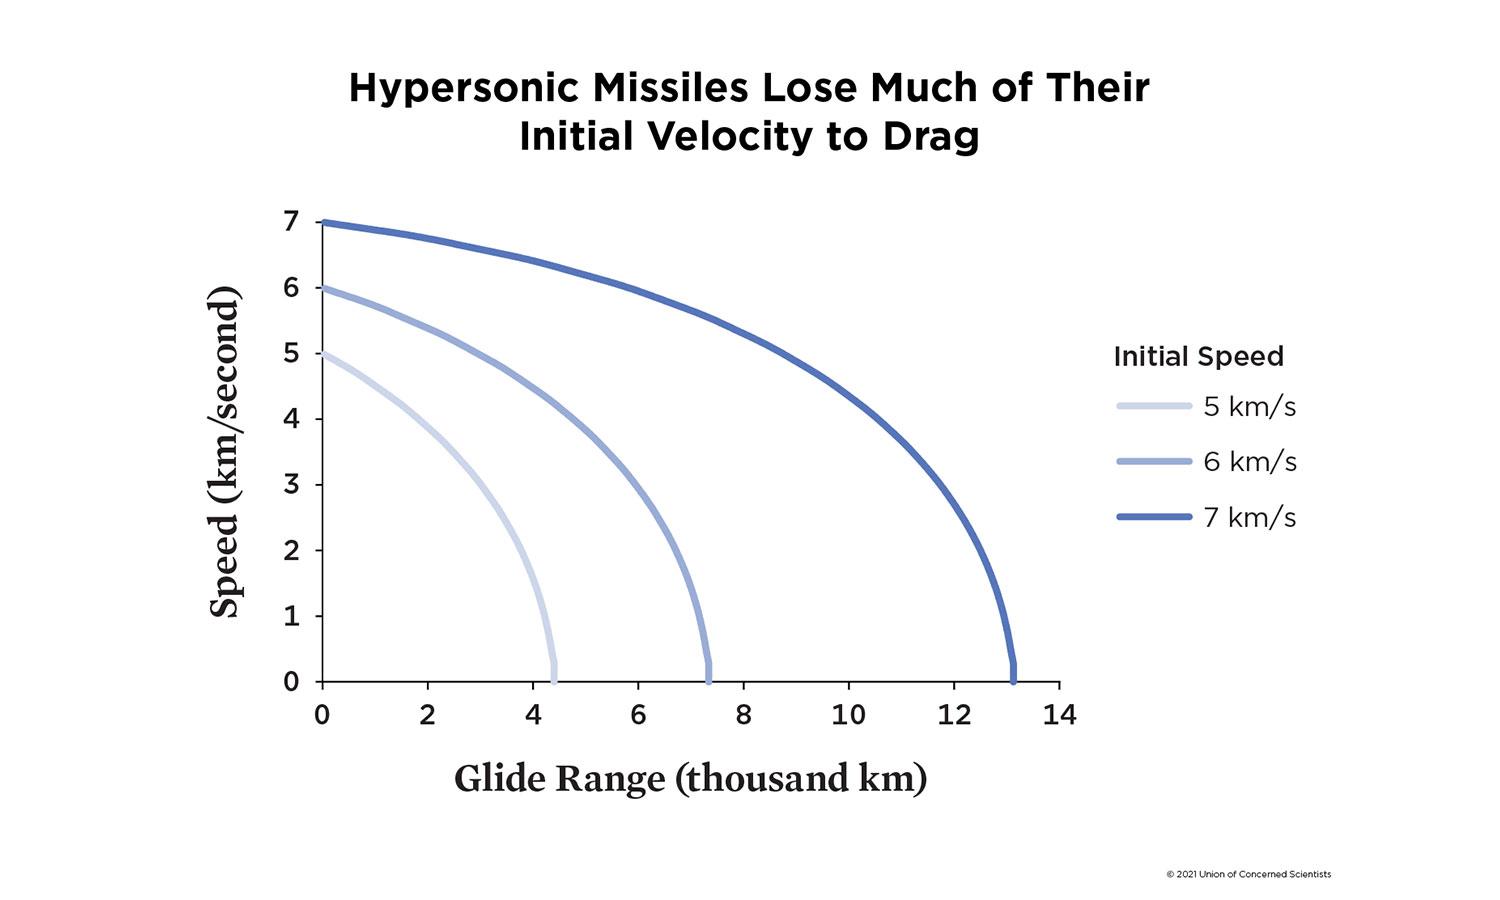 Chart showing the glide range of hypersonic missiles and how the initial velocity lost due to drag